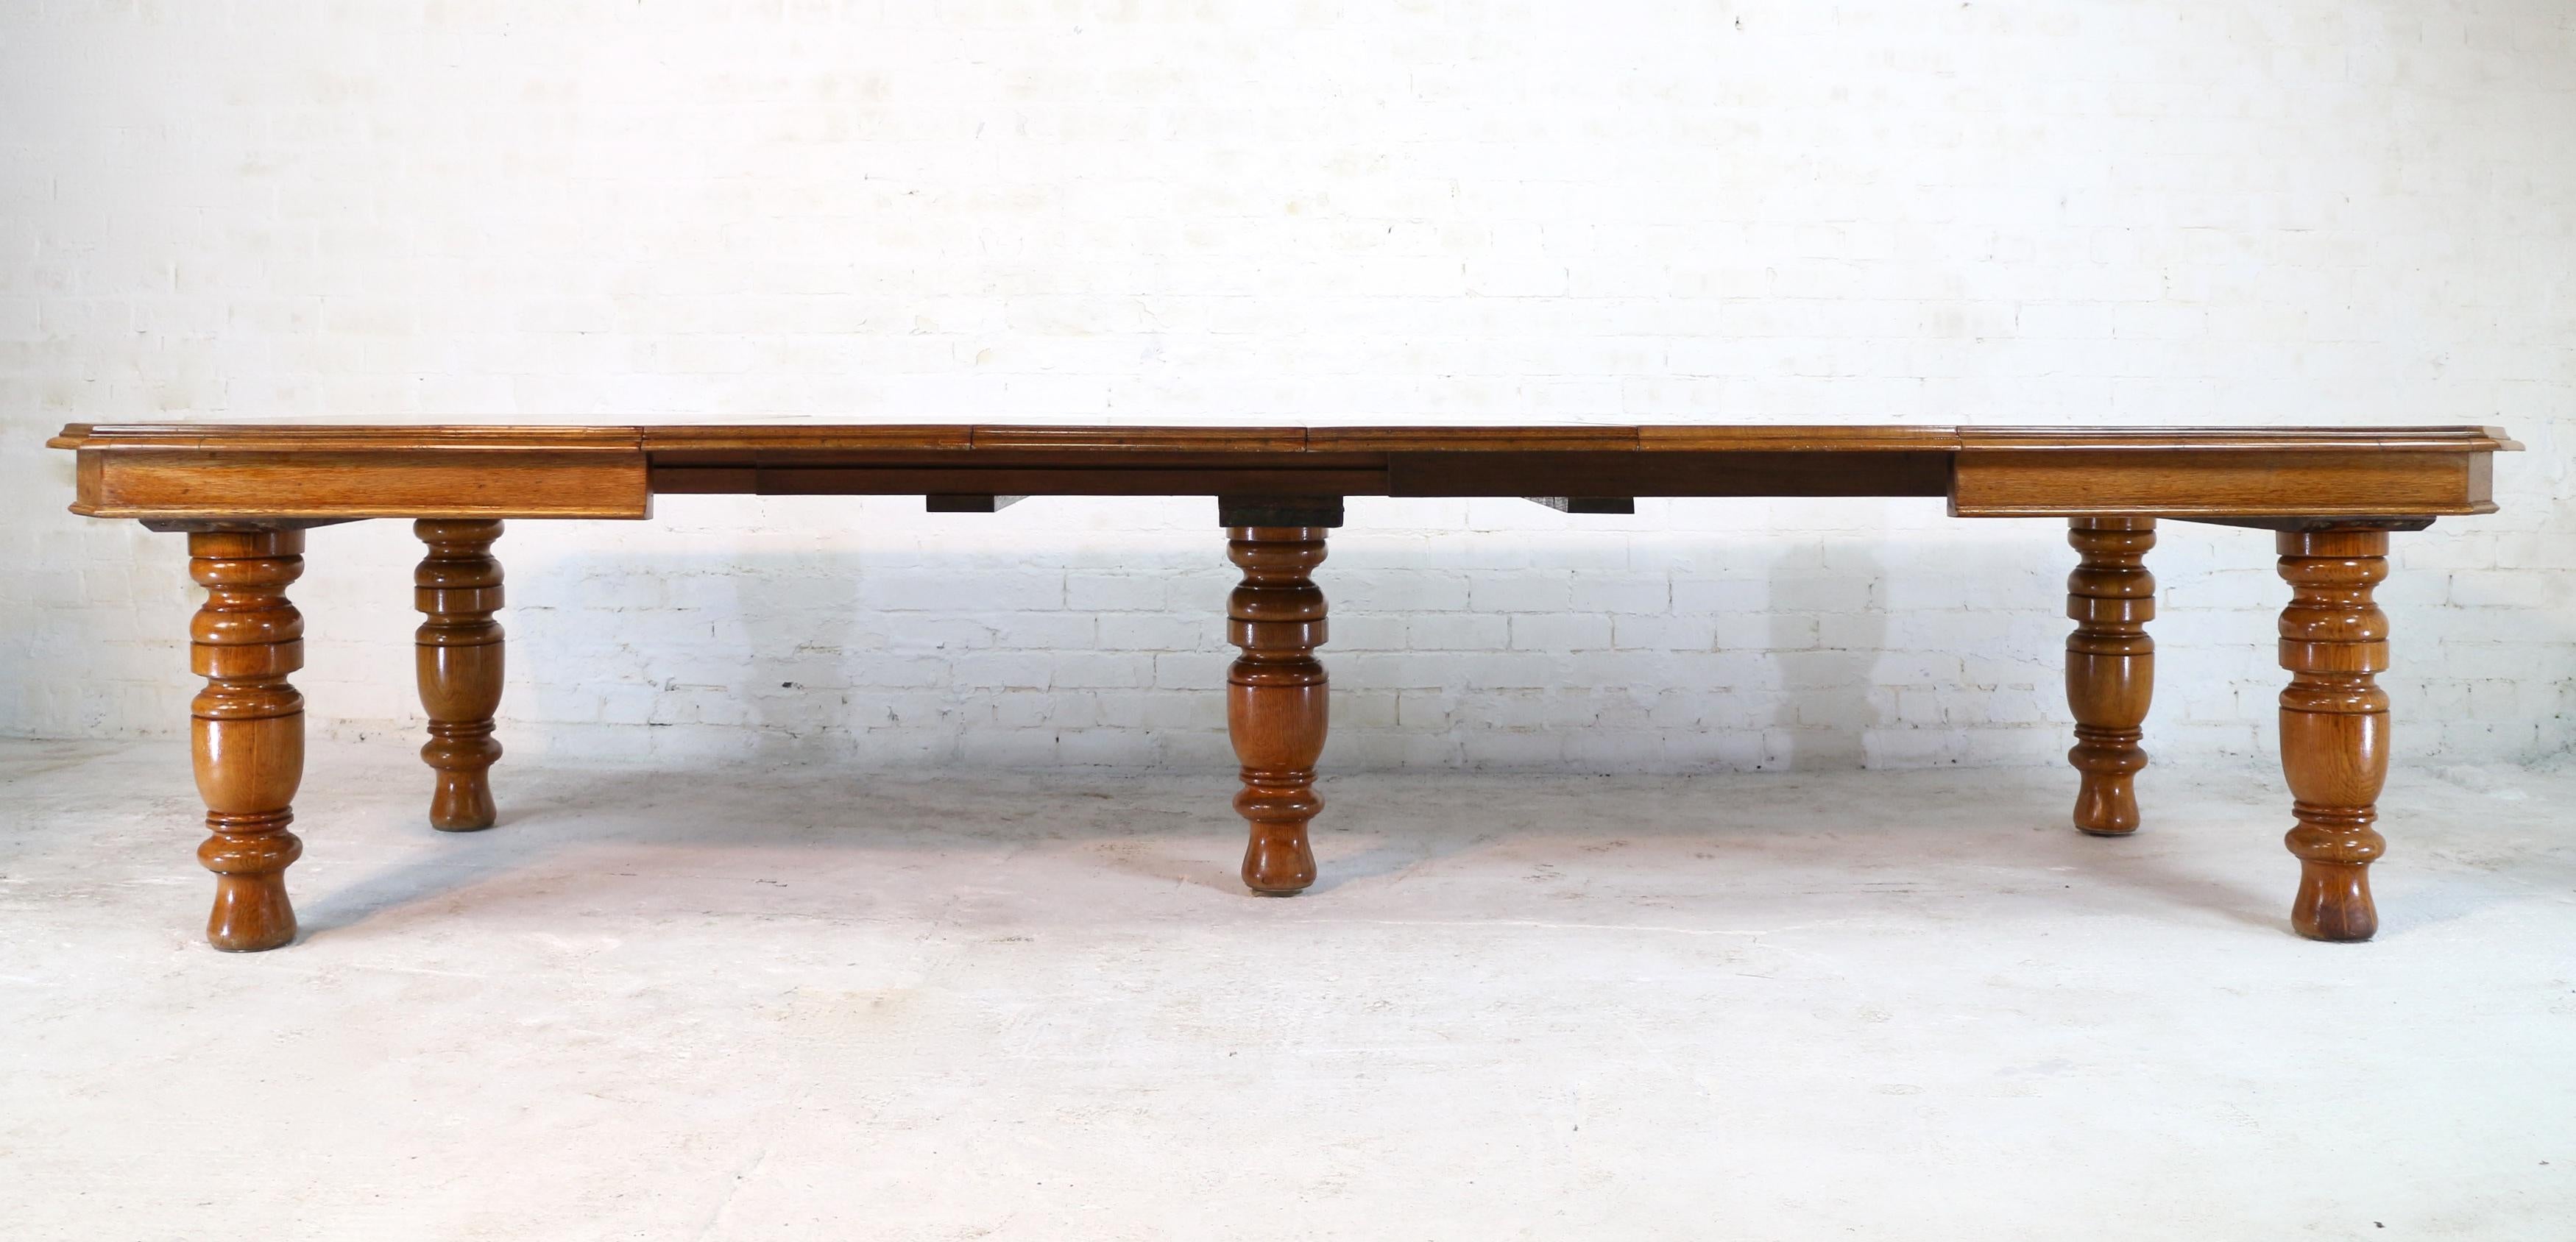 Hand-Crafted Antique English Victorian Oak Extending Dining Table & 4 Leaves, 12ft/Seats 14 For Sale